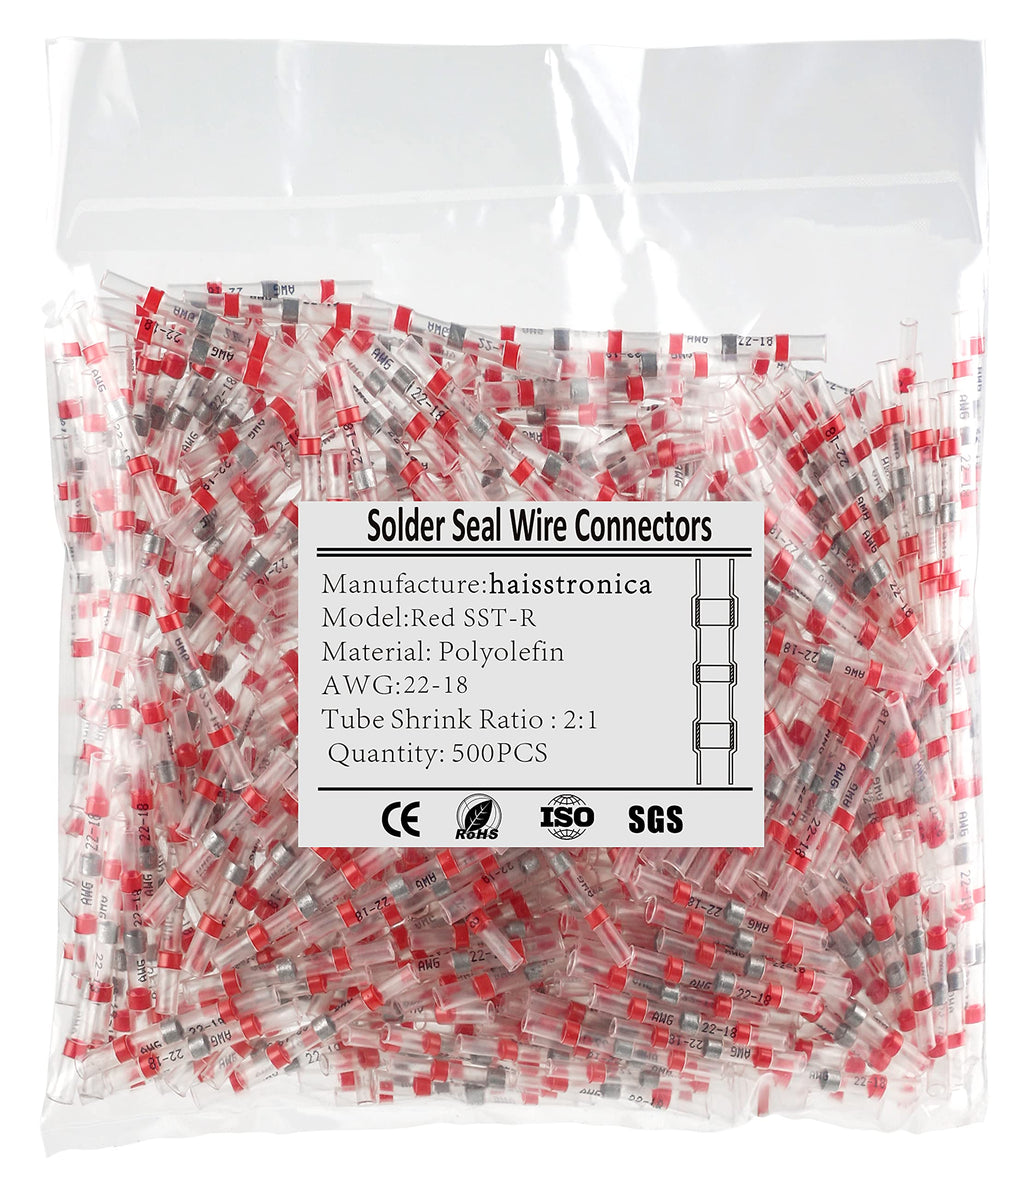 500PCS Red Solder Seal Wire Connectors AWG22-18,haisstronica Marine Grade Waterproof Solder Wire Connectors,Heat Shrink Butt Connectors,Insulated Butt Splice Electrical Connectors AWG 22-18 Red 500